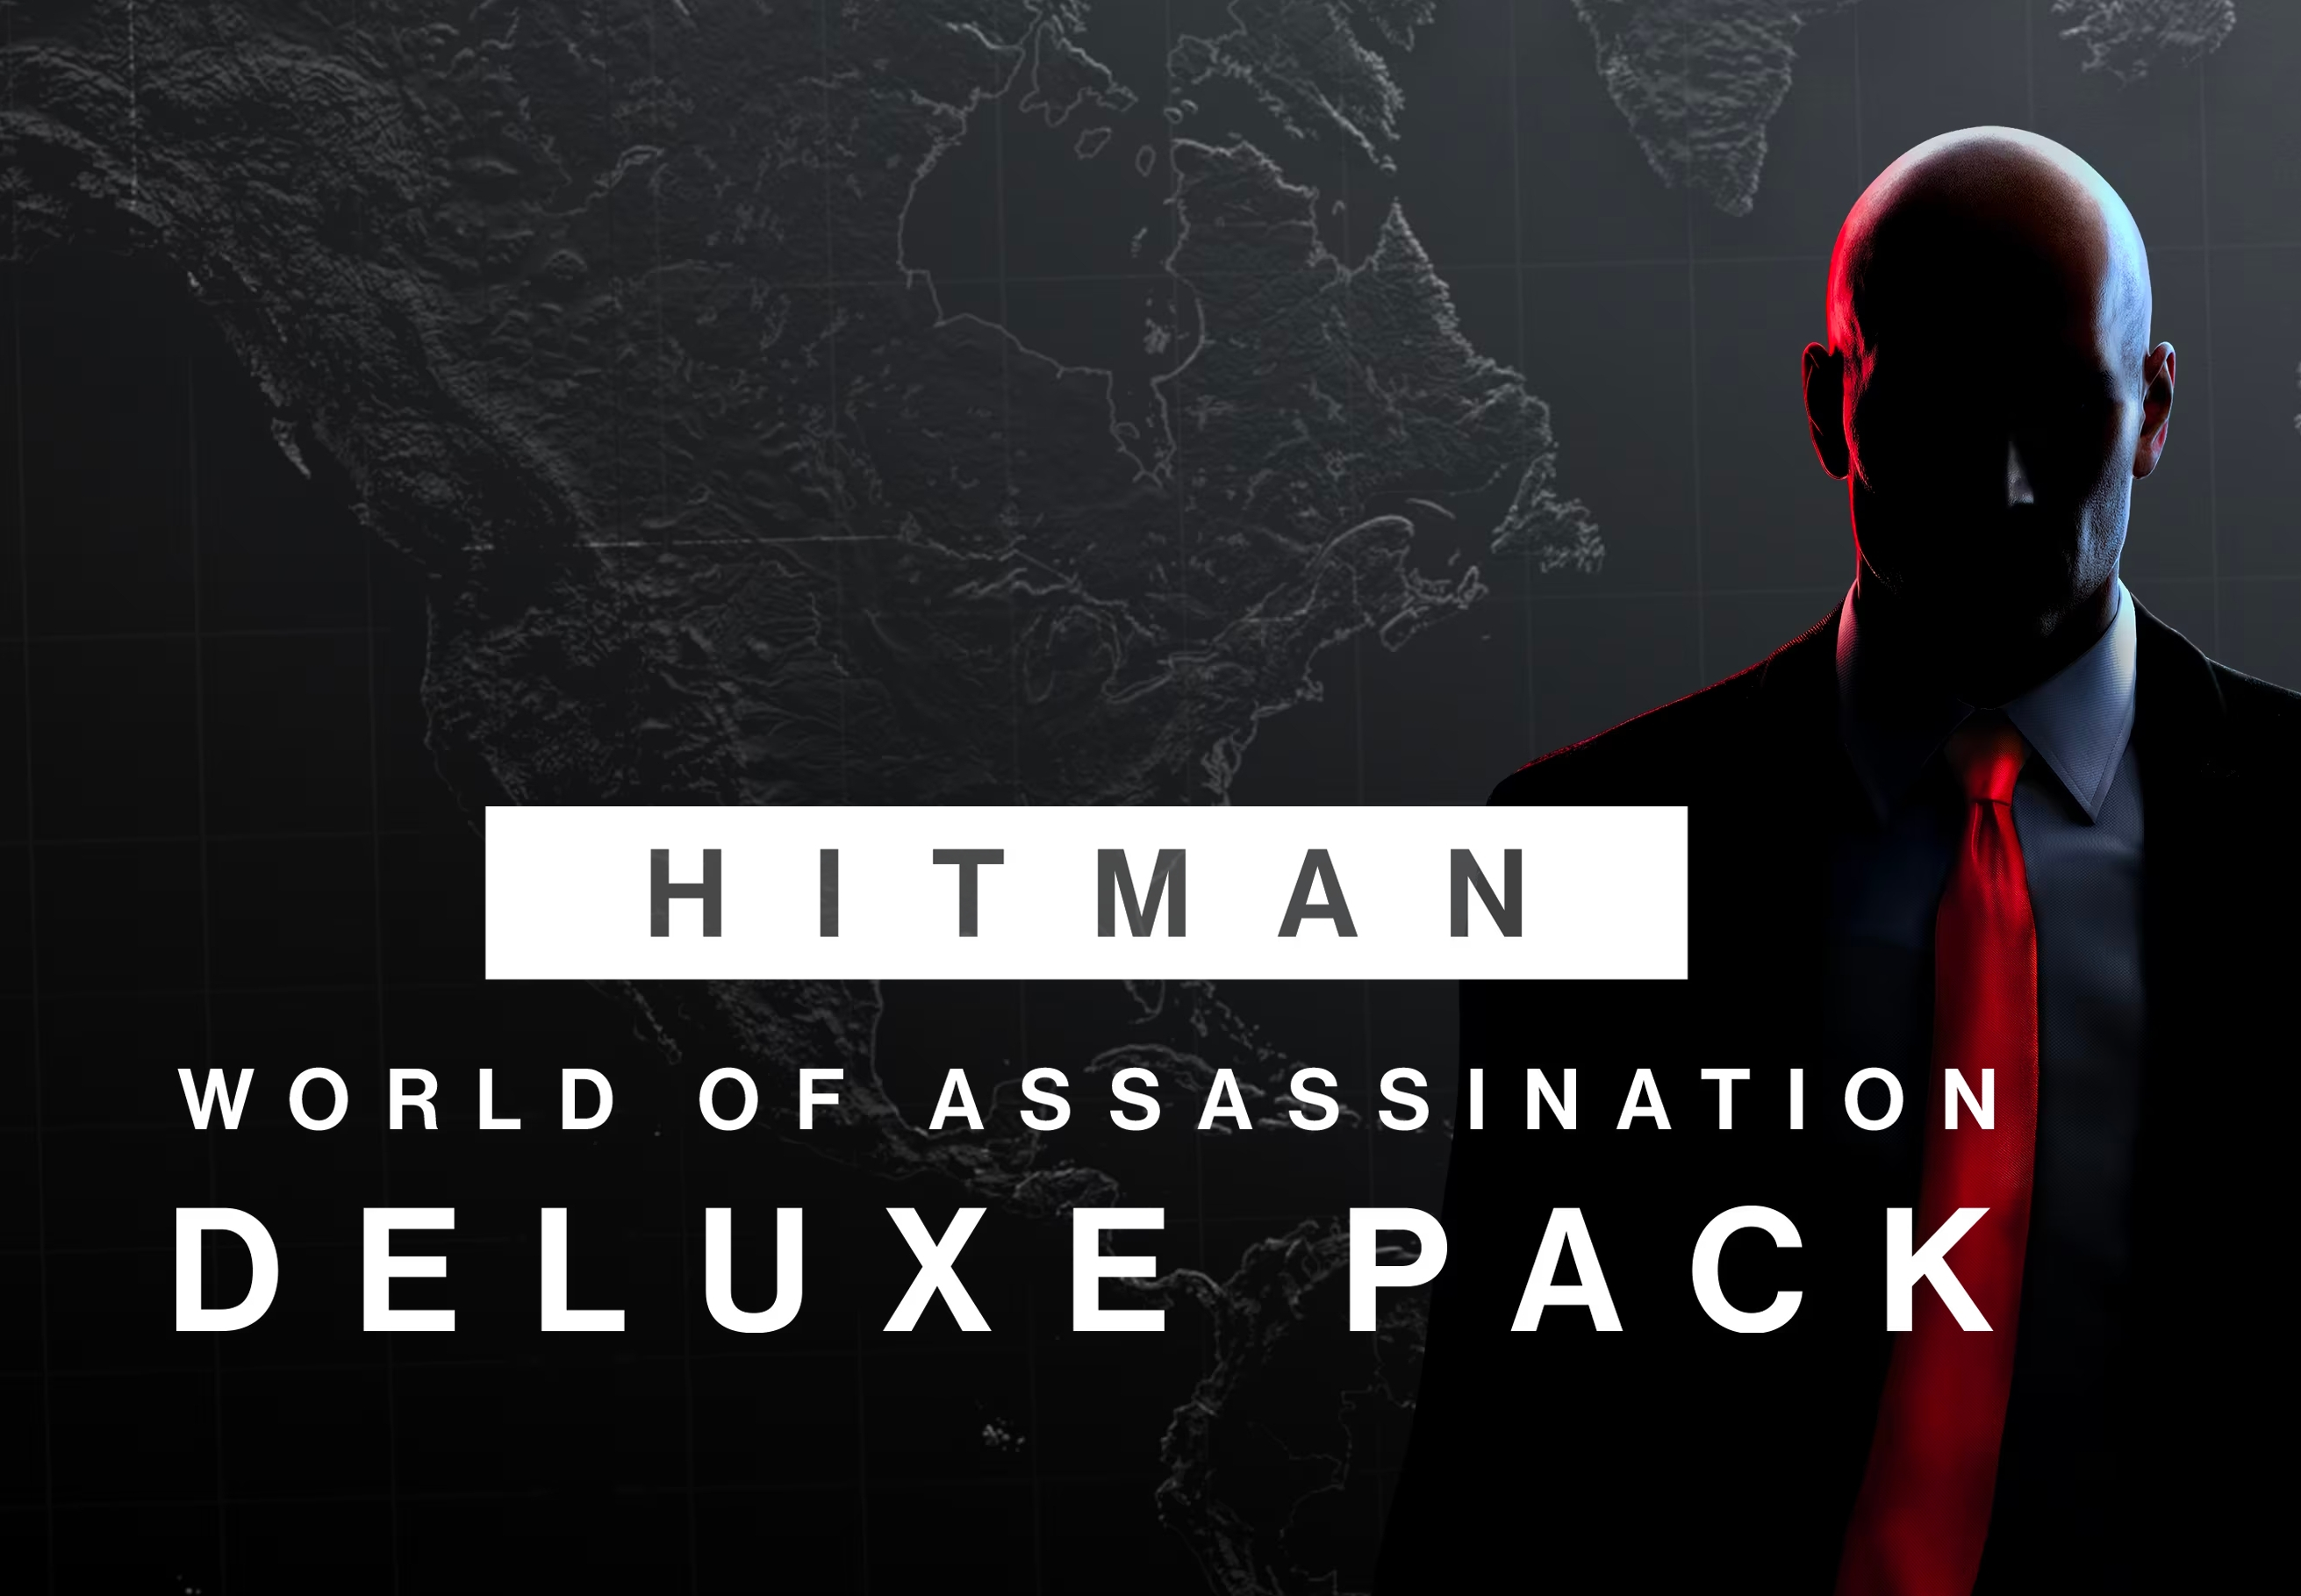 HITMAN World of Assassination Deluxe Pack AR XBOX One / Xbox Series X|S CD Key